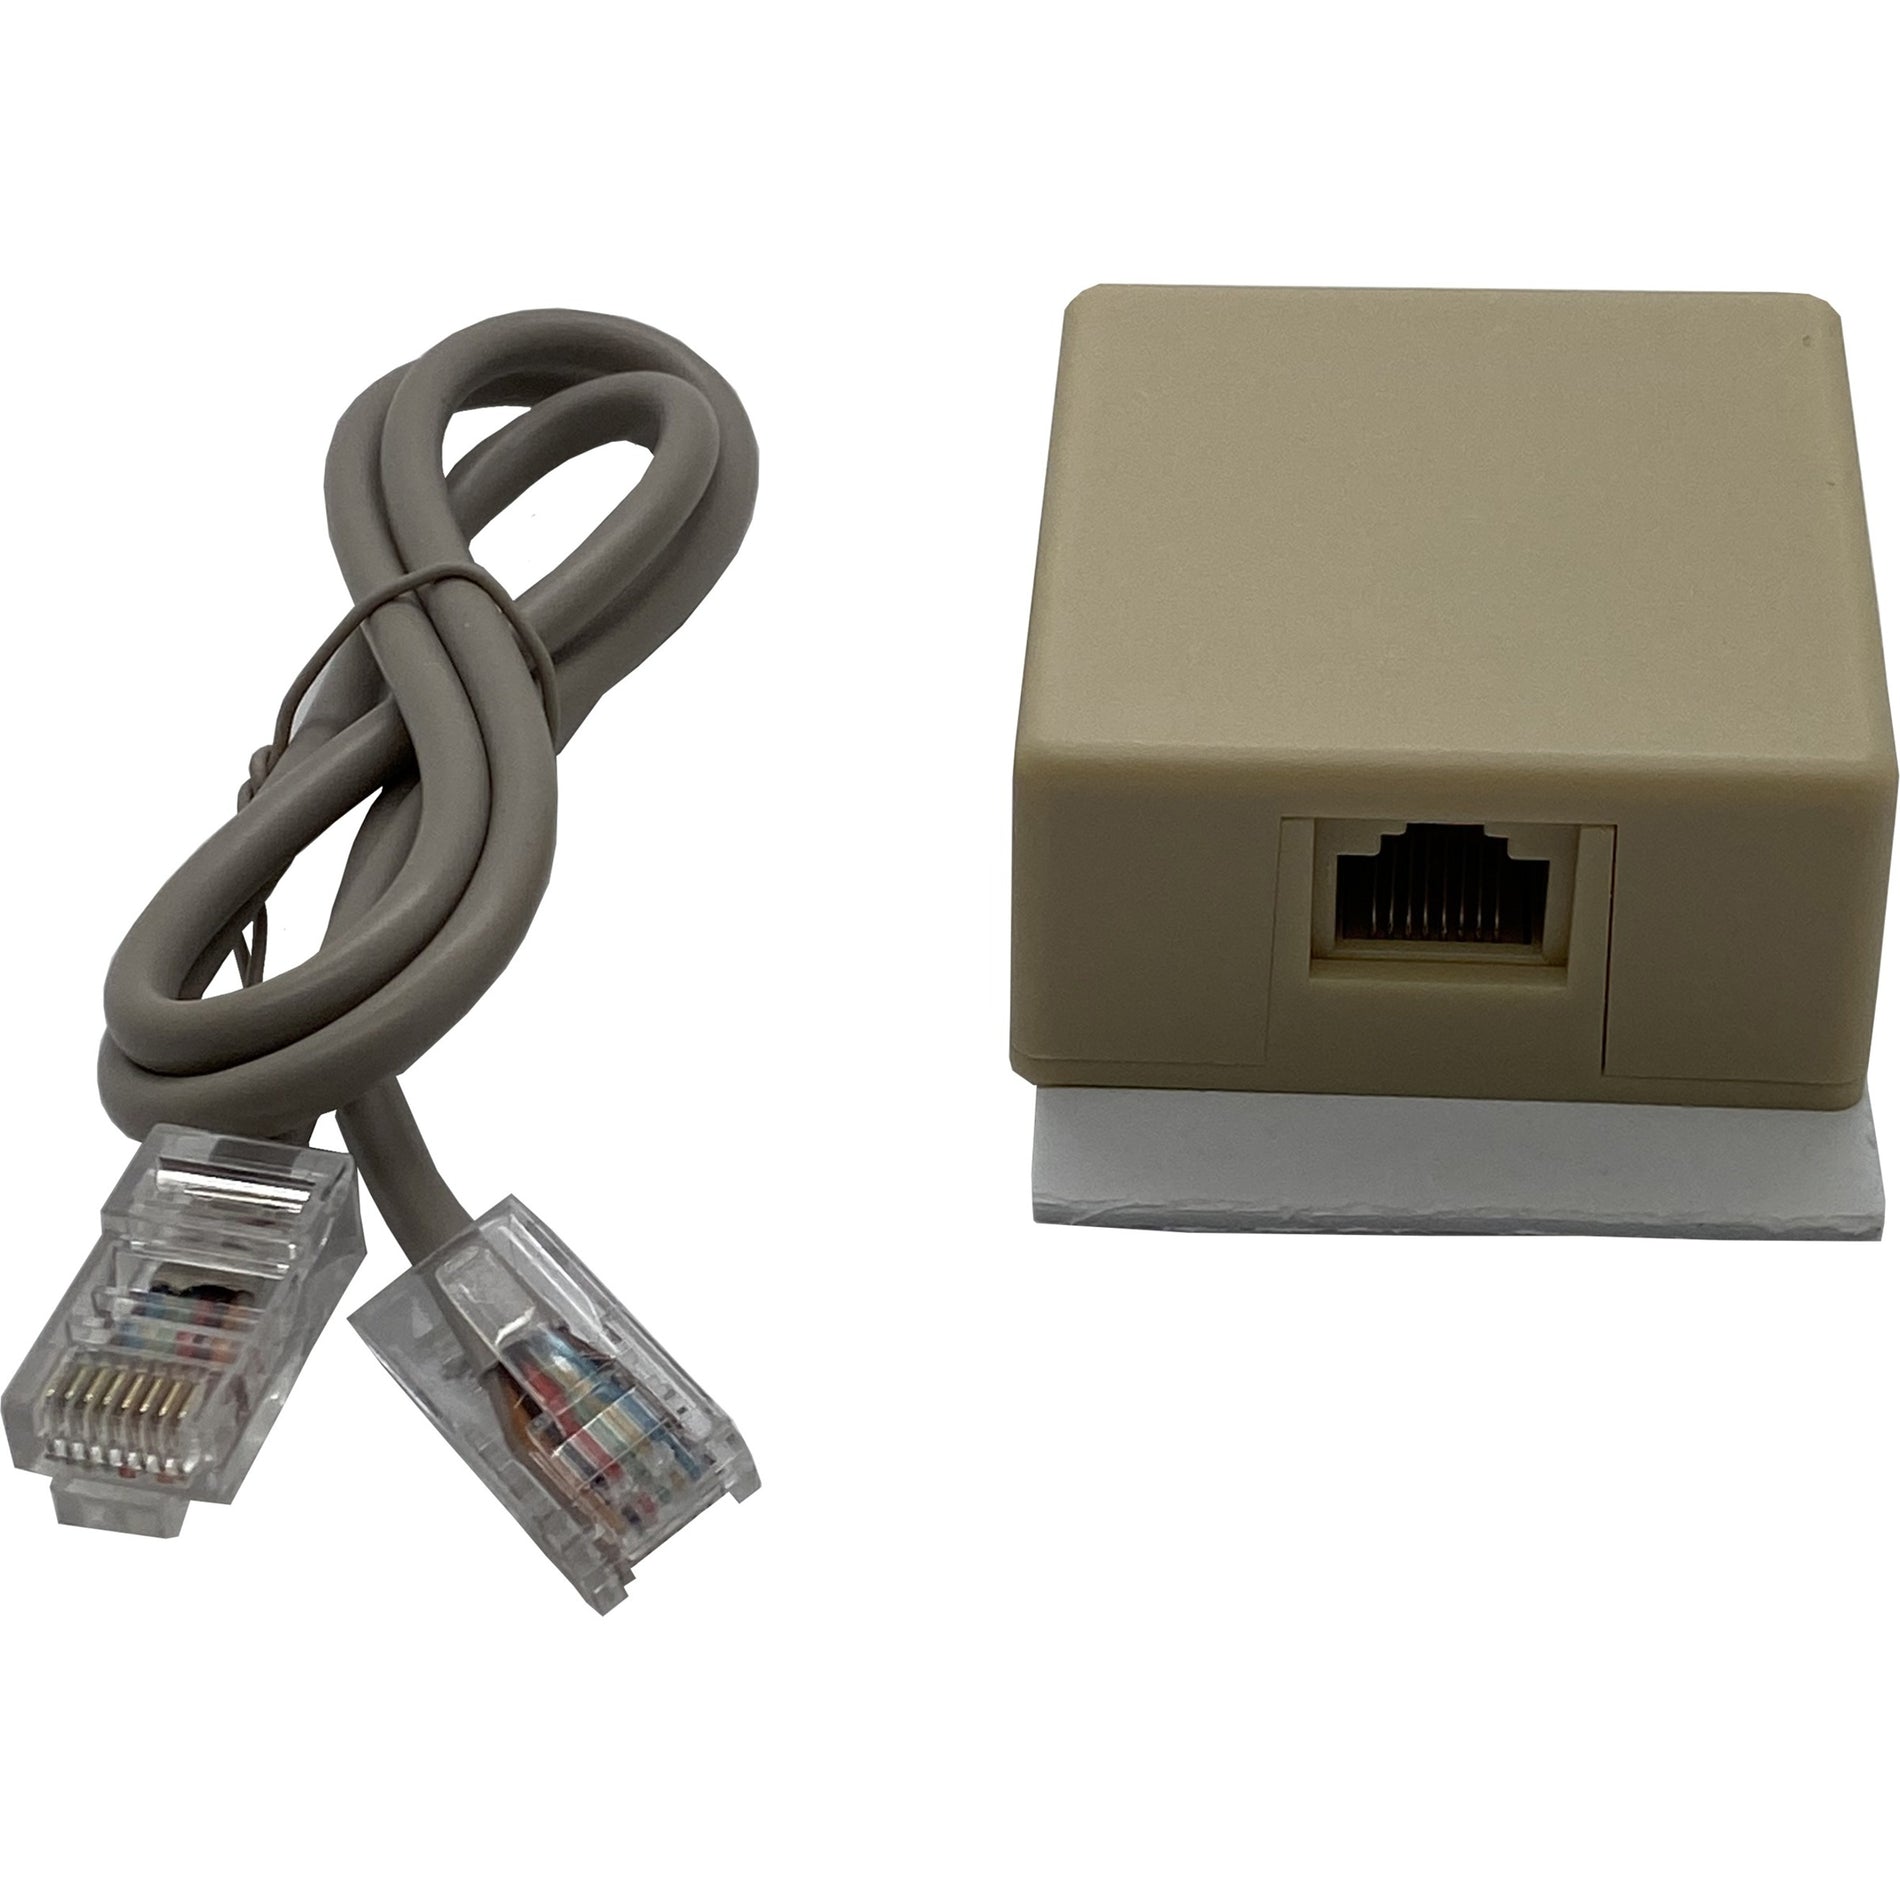 W Box 0E-SETULR2 RJ31X Jack + 2' RJ 45 M-M Cable, Silver - Easy-to-Use Accessory Kit for Secure Connections